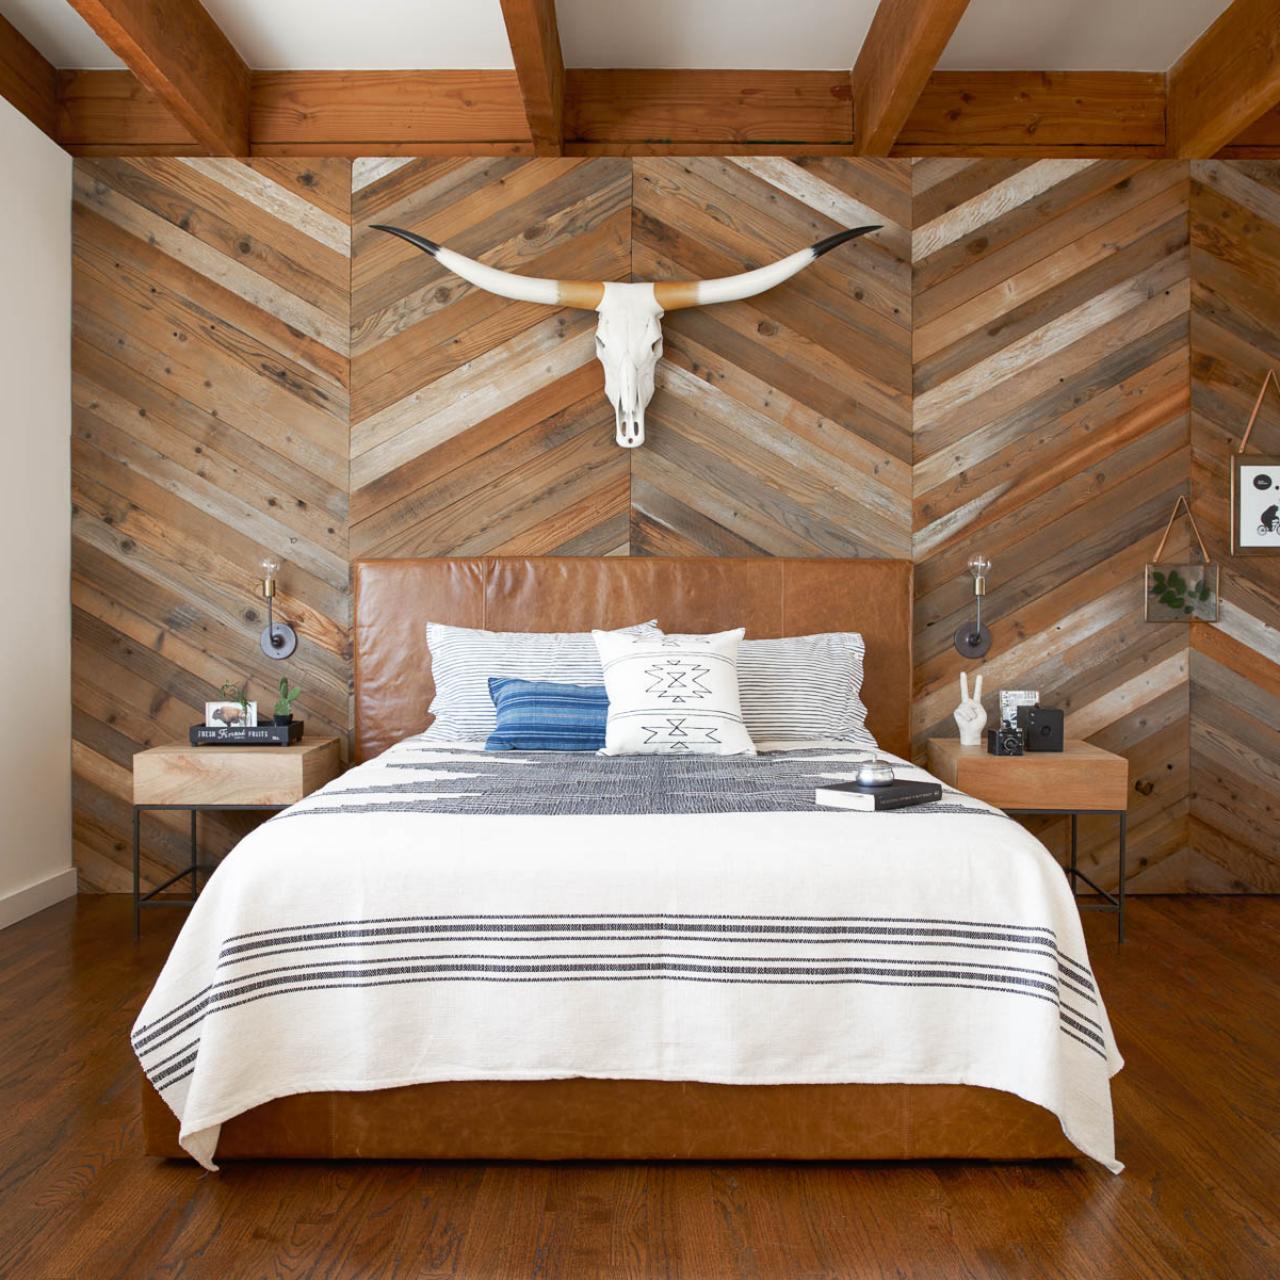 The new rustic – 5 Dreamy spaces that bring a modern western vibe